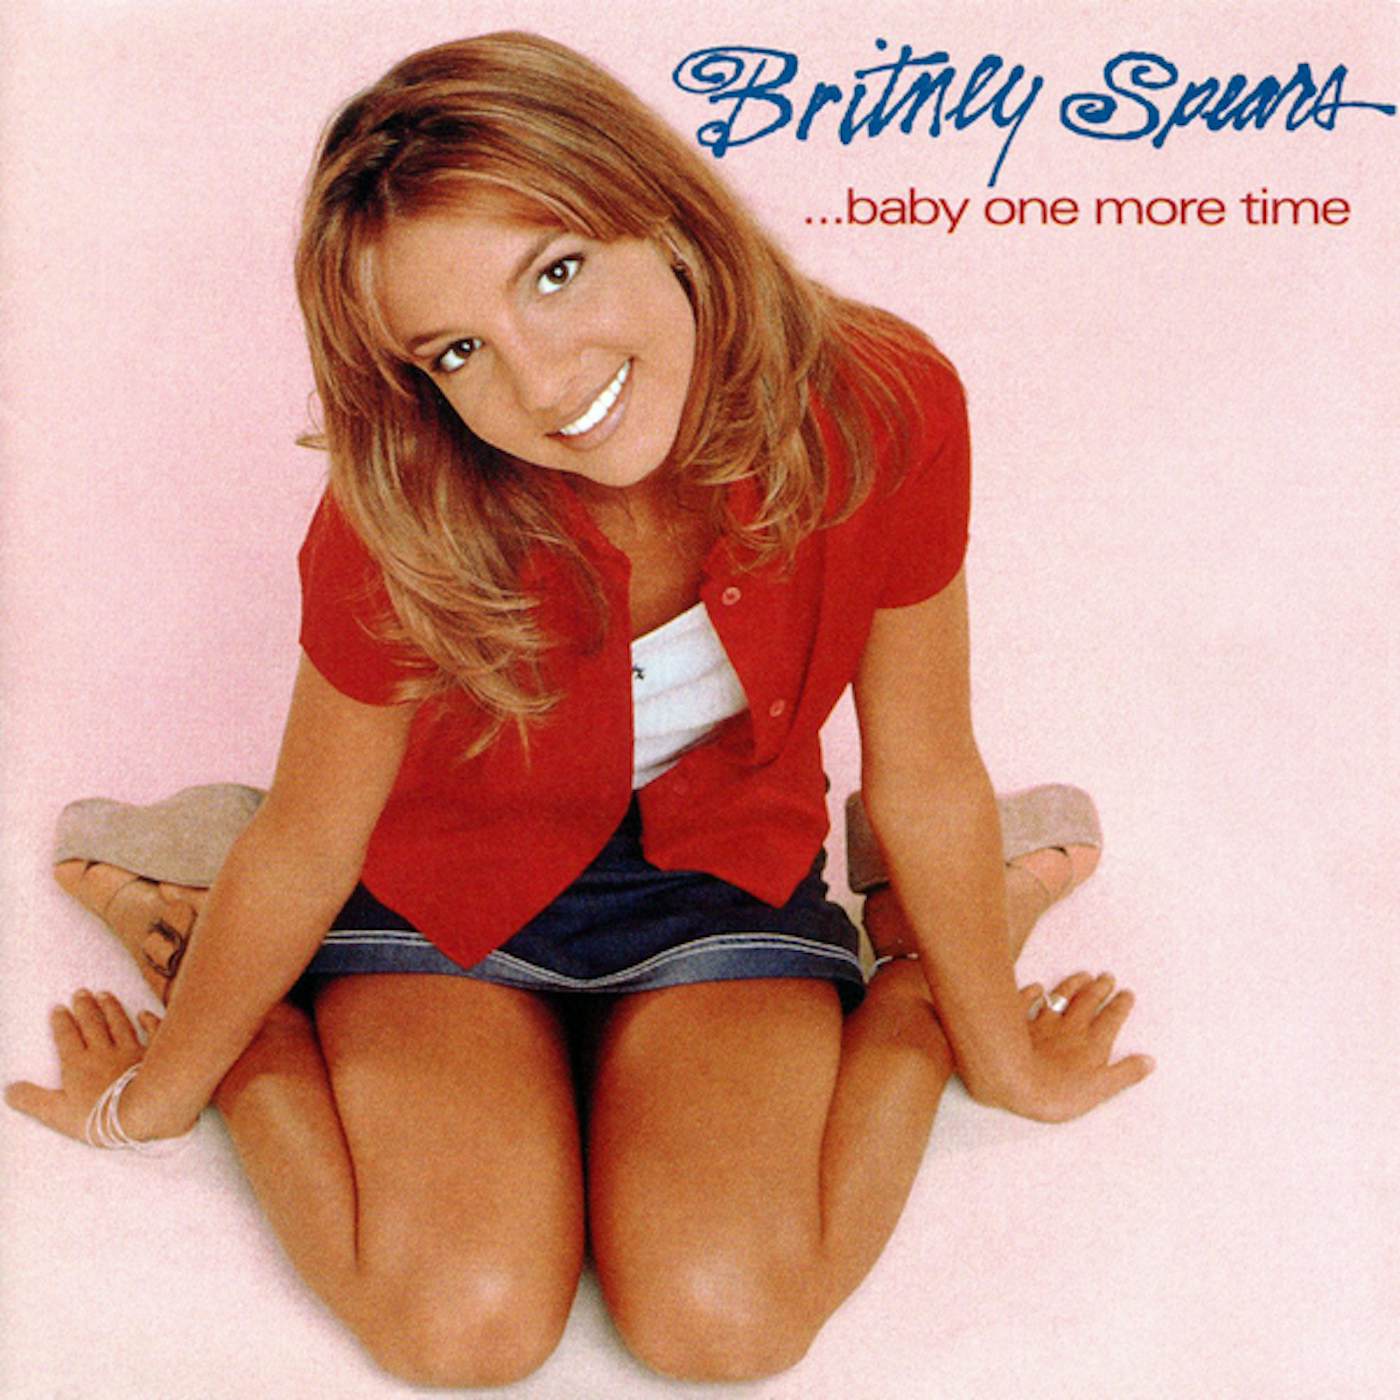 Britney Spears BABY ONE MORE TIME CD